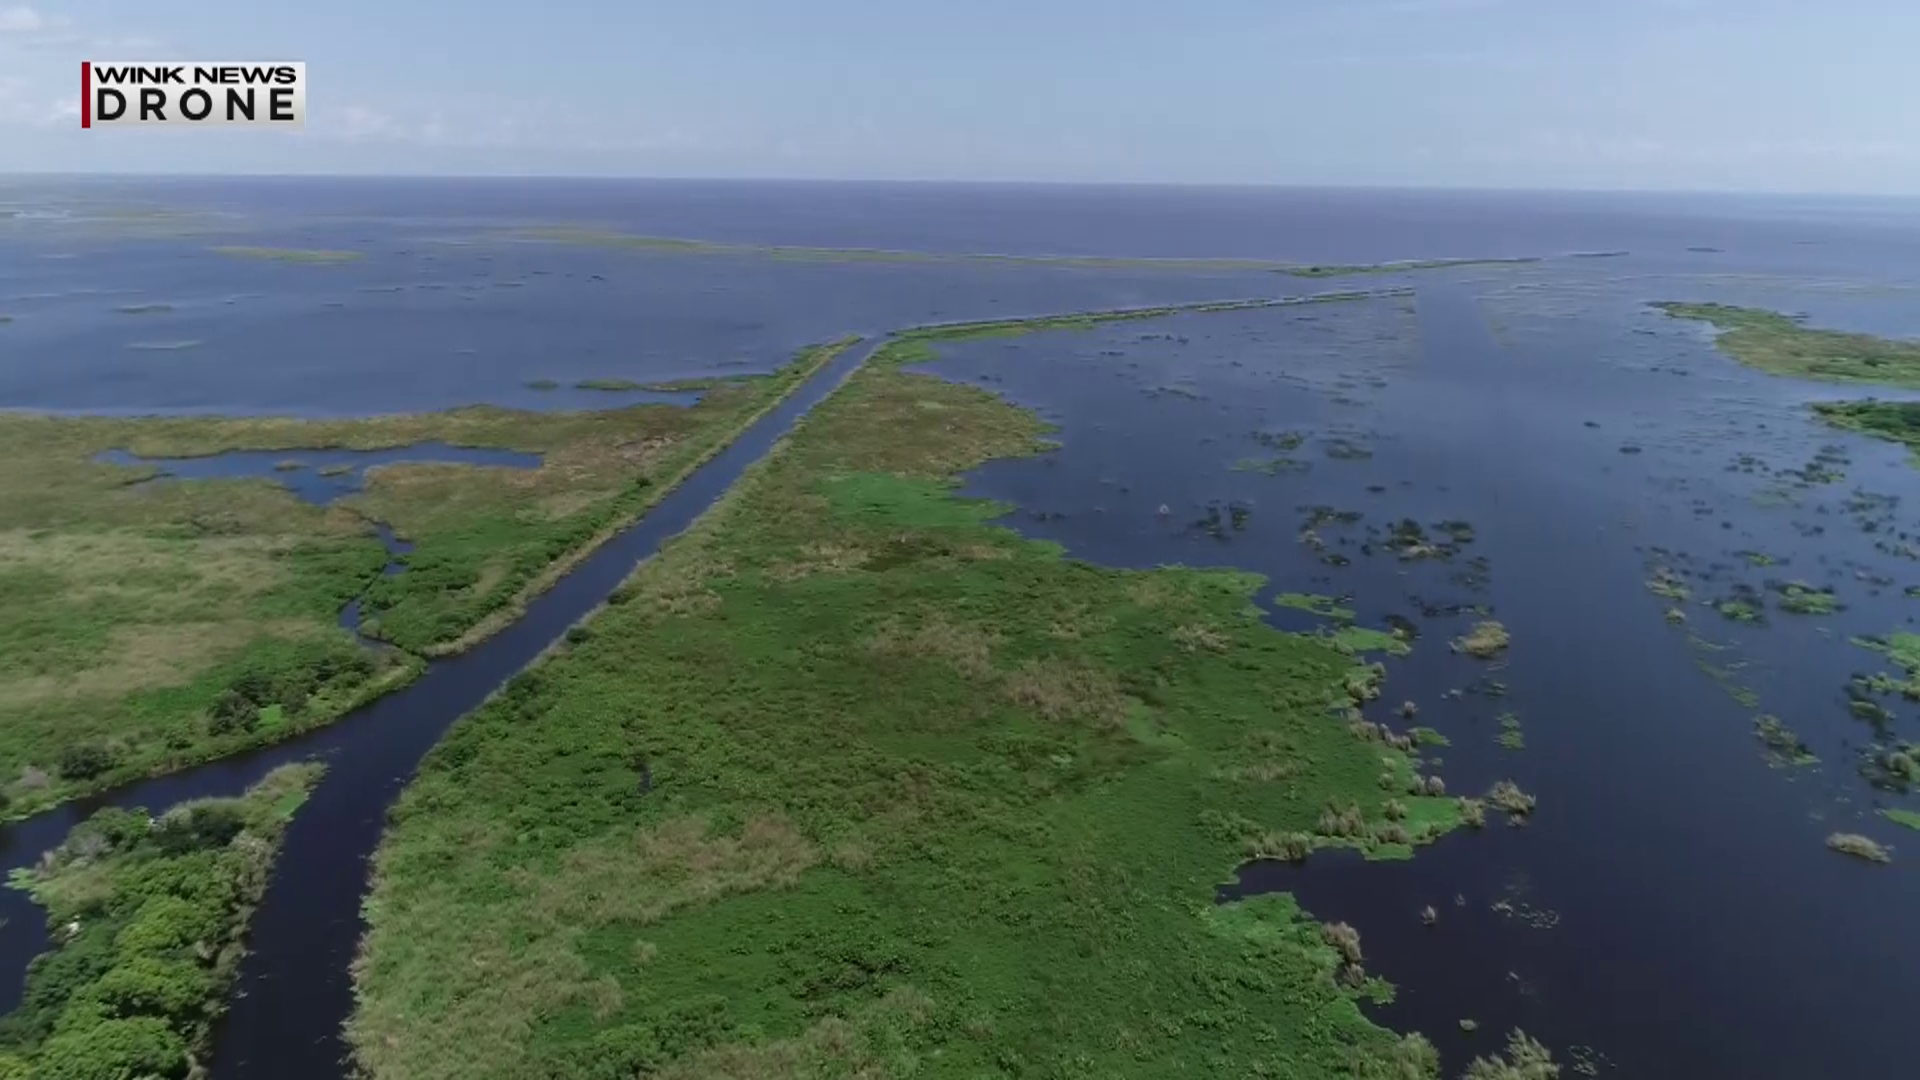 Research sheds light on Lake Okeechobee issues - Wink News